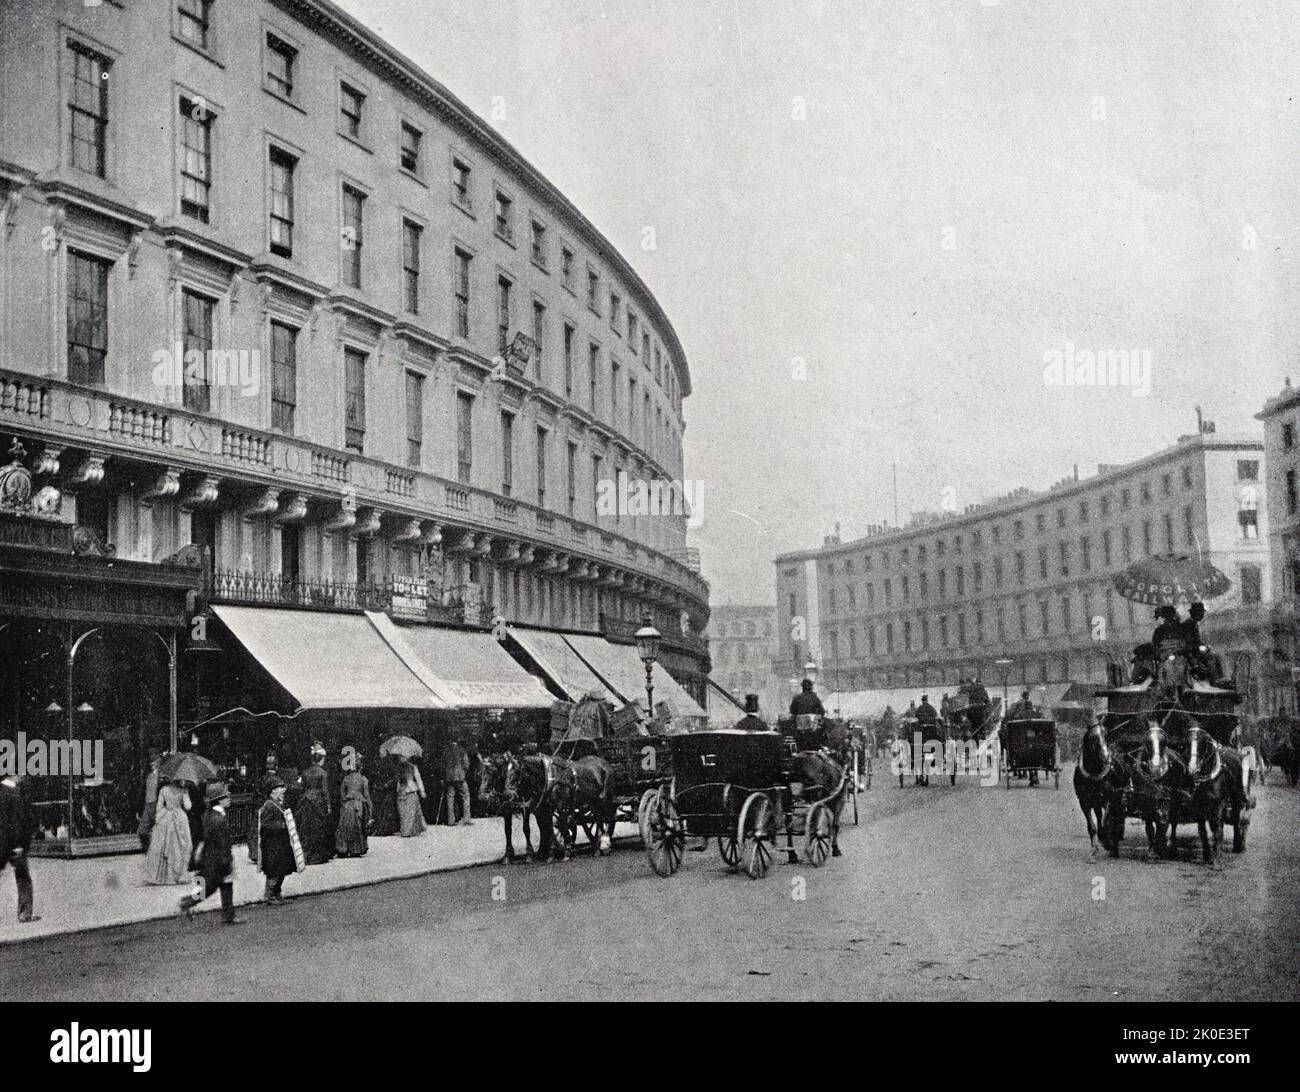 London scene in Regent street with horse drawn buggies and shoppers. 1900 Stock Photo